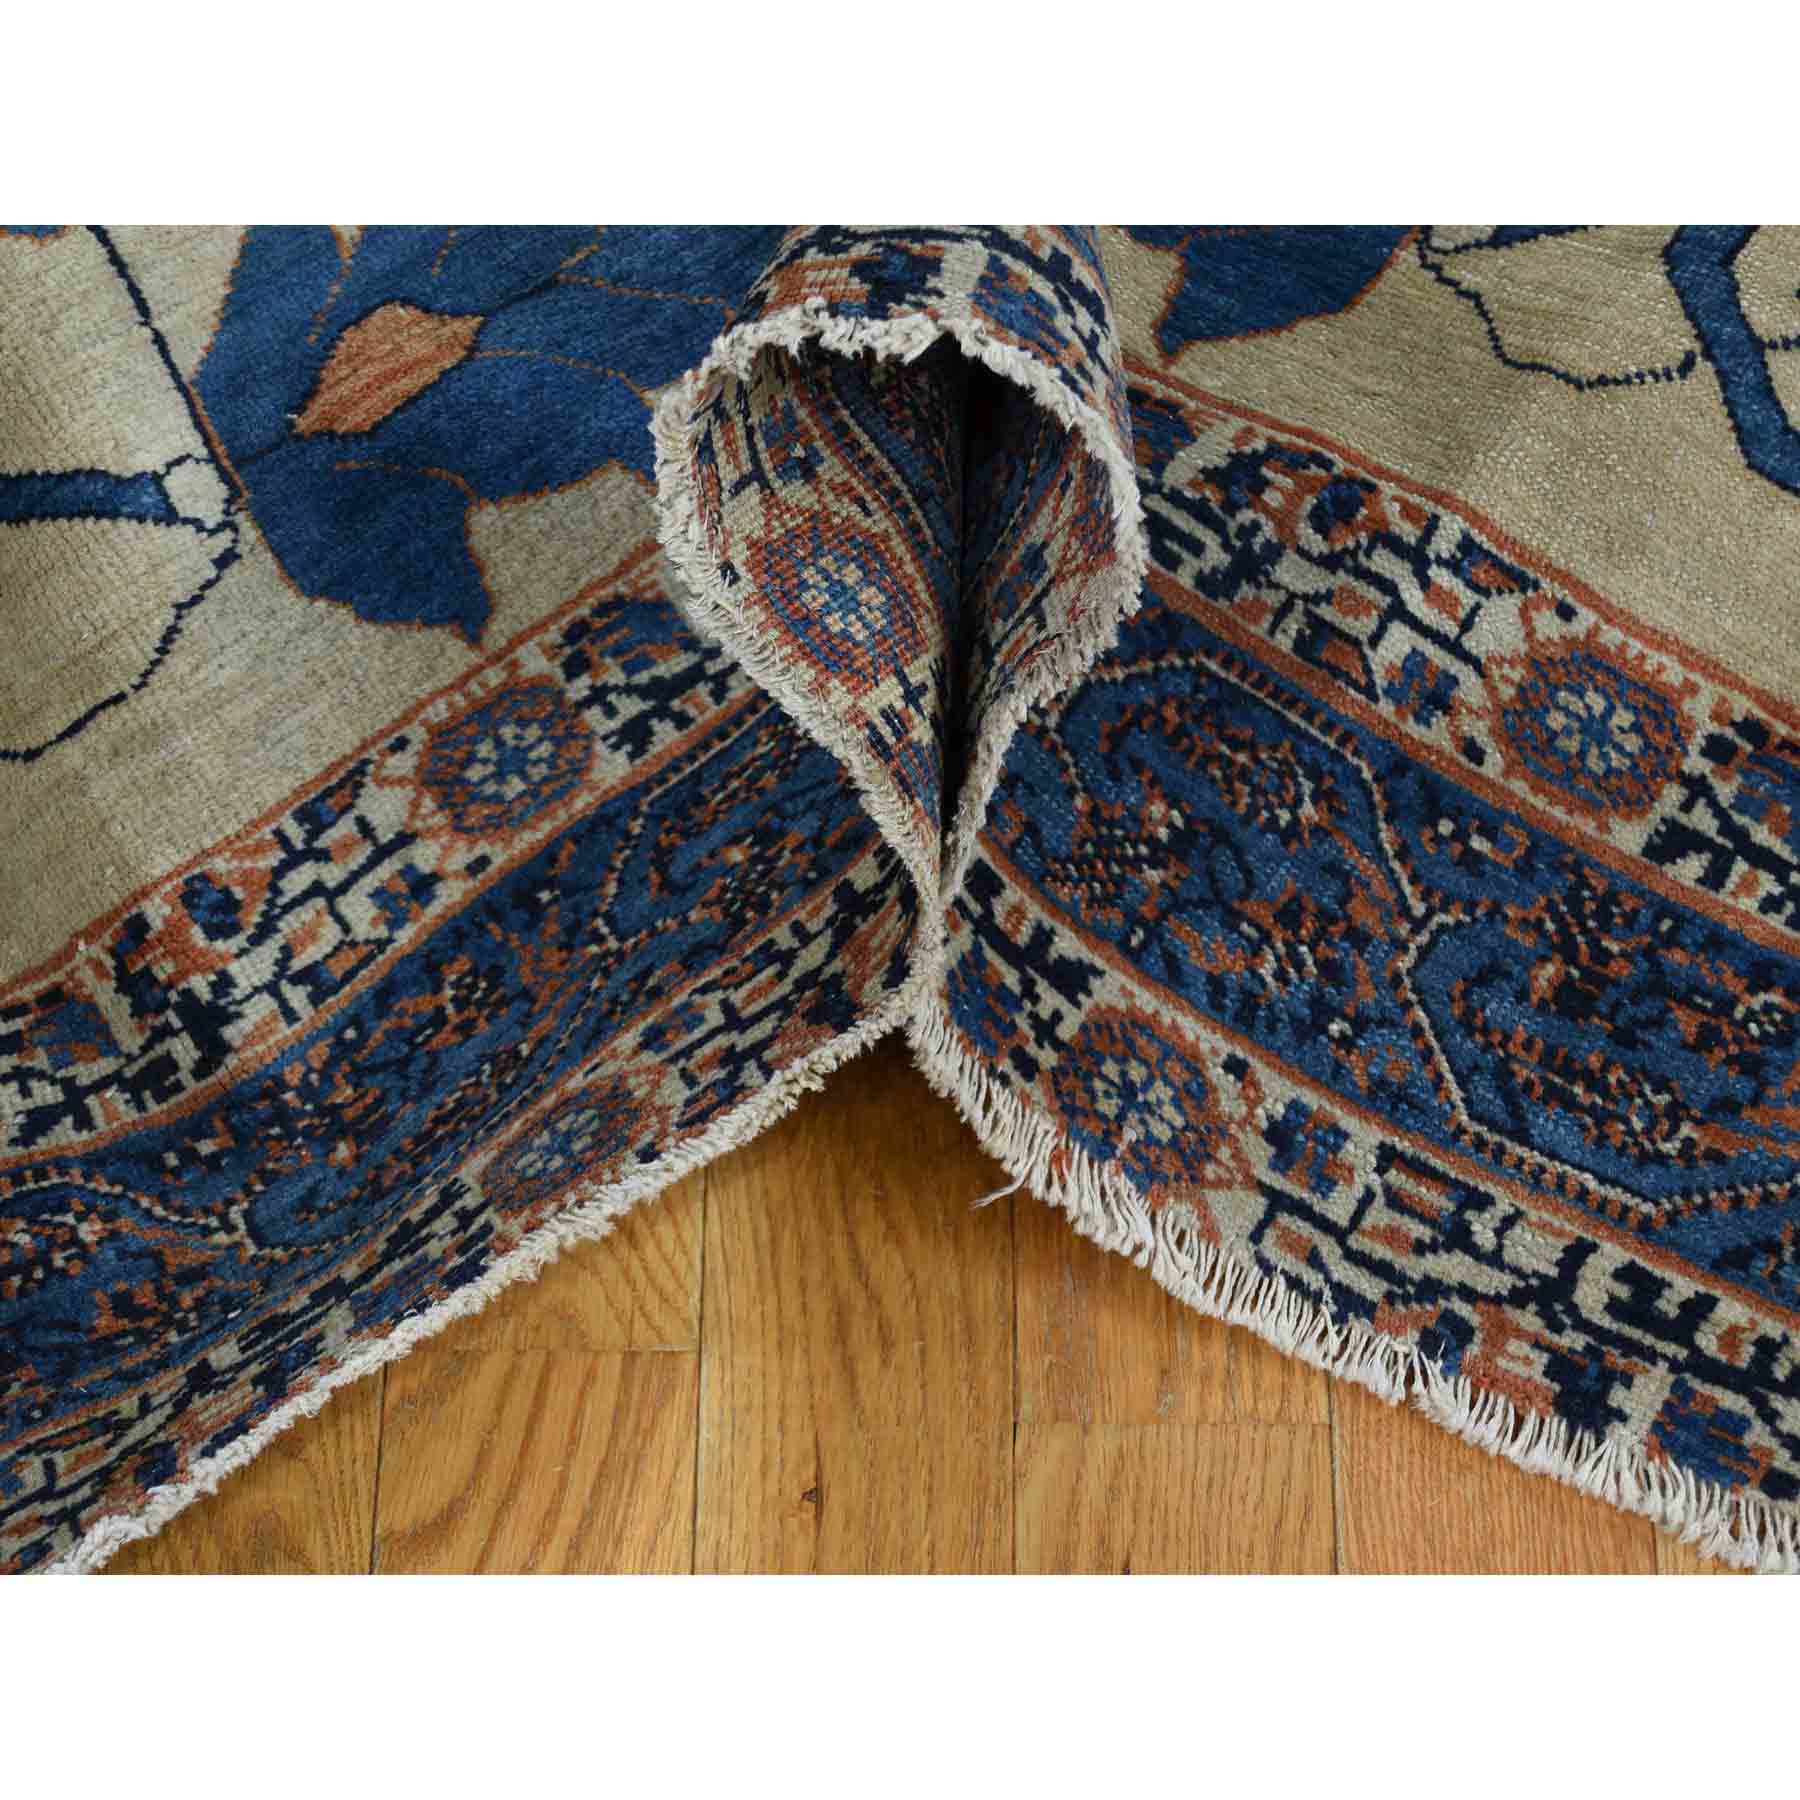 Antique-Hand-Knotted-Rug-198755